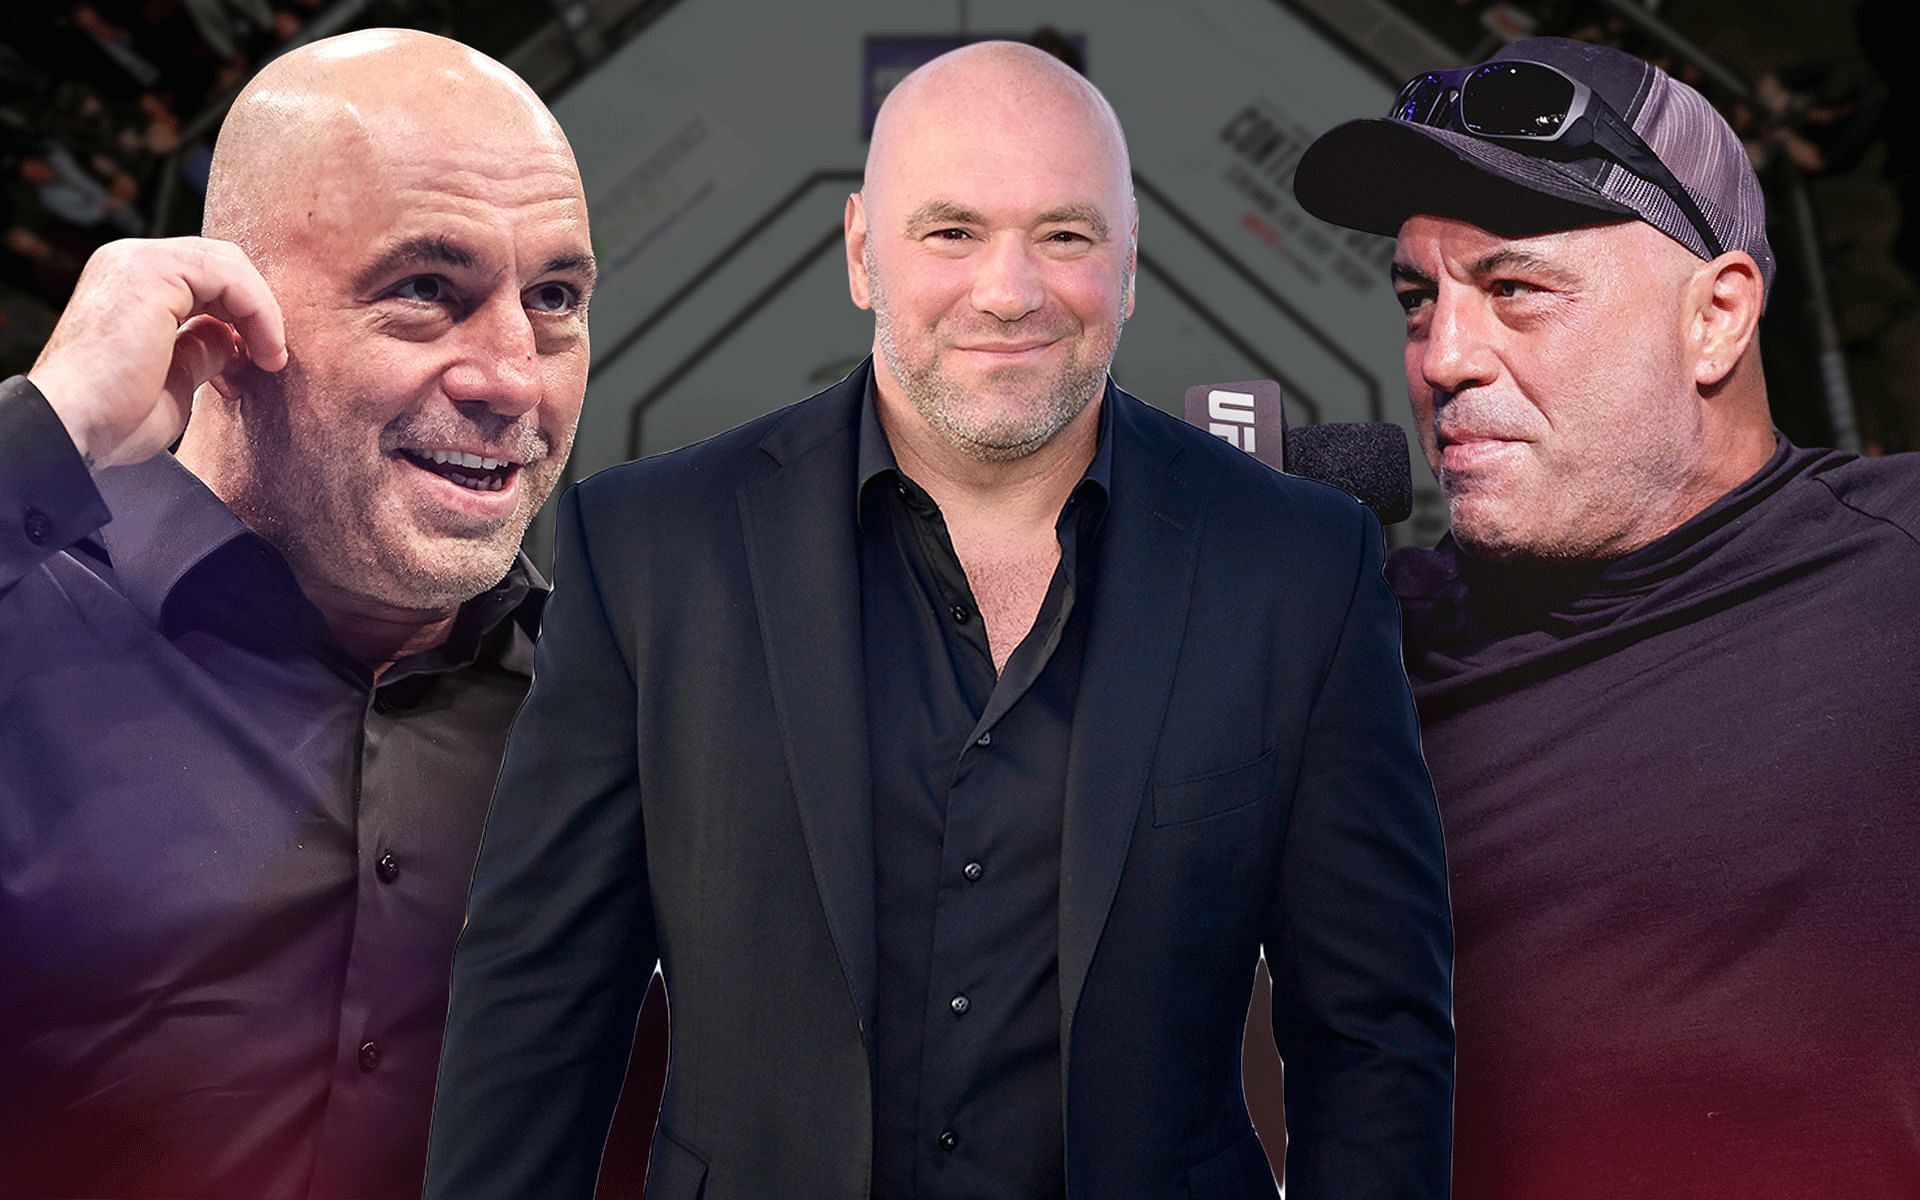 Dana White (middle) talks about hiring Joe Rogan (sides) for the UFC broadcast team [Image via: Getty Images] 